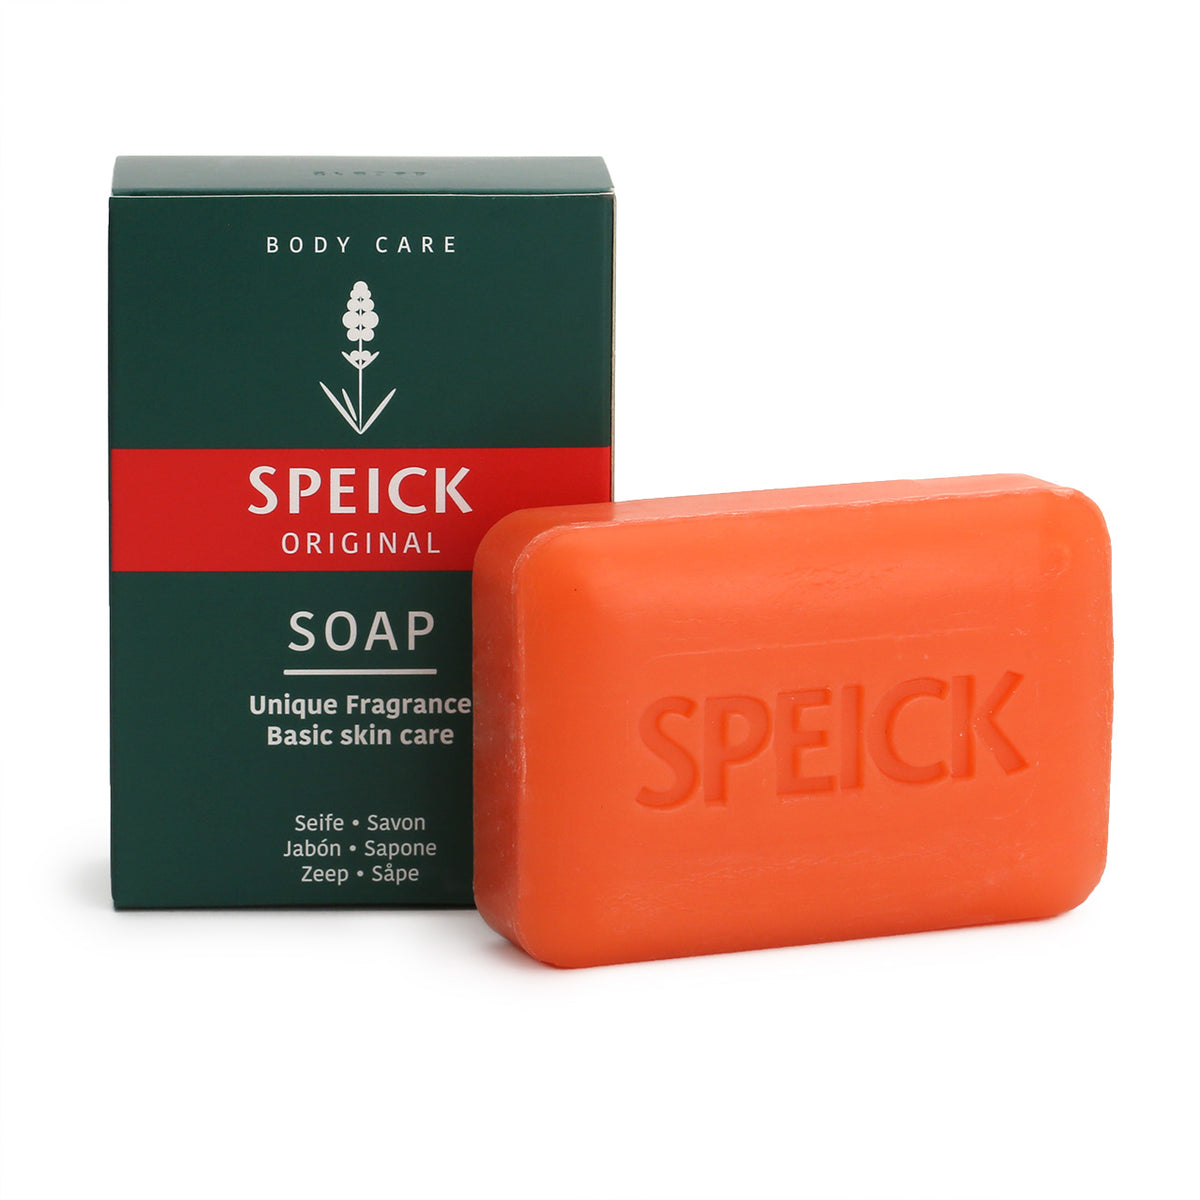 Speick Original Soap in green and red box is a deep orange hard soap with embossed SPEICK on the face